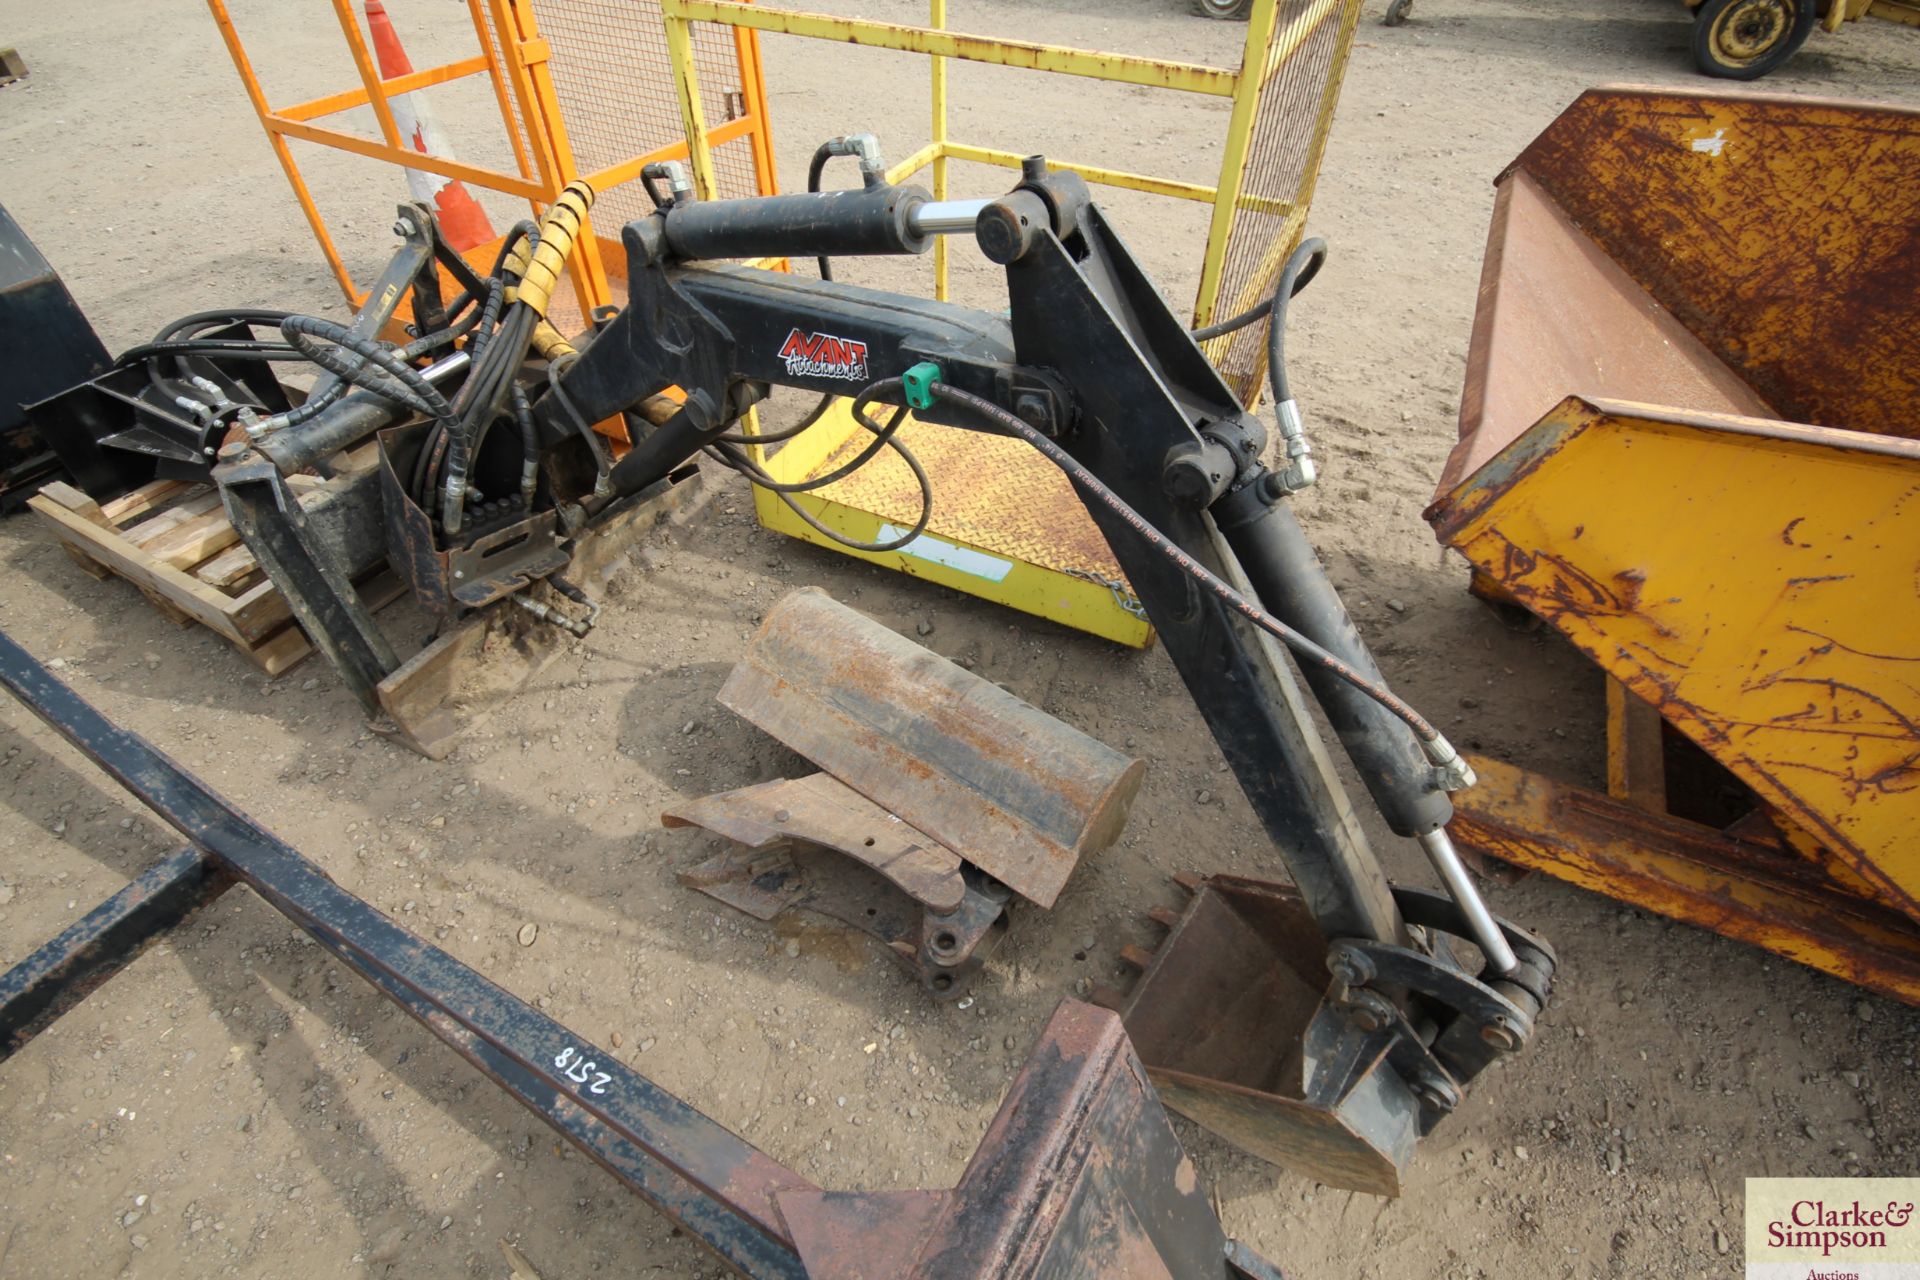 Avant back hoe for Avant loader. With 10in, 16in and 30in buckets.